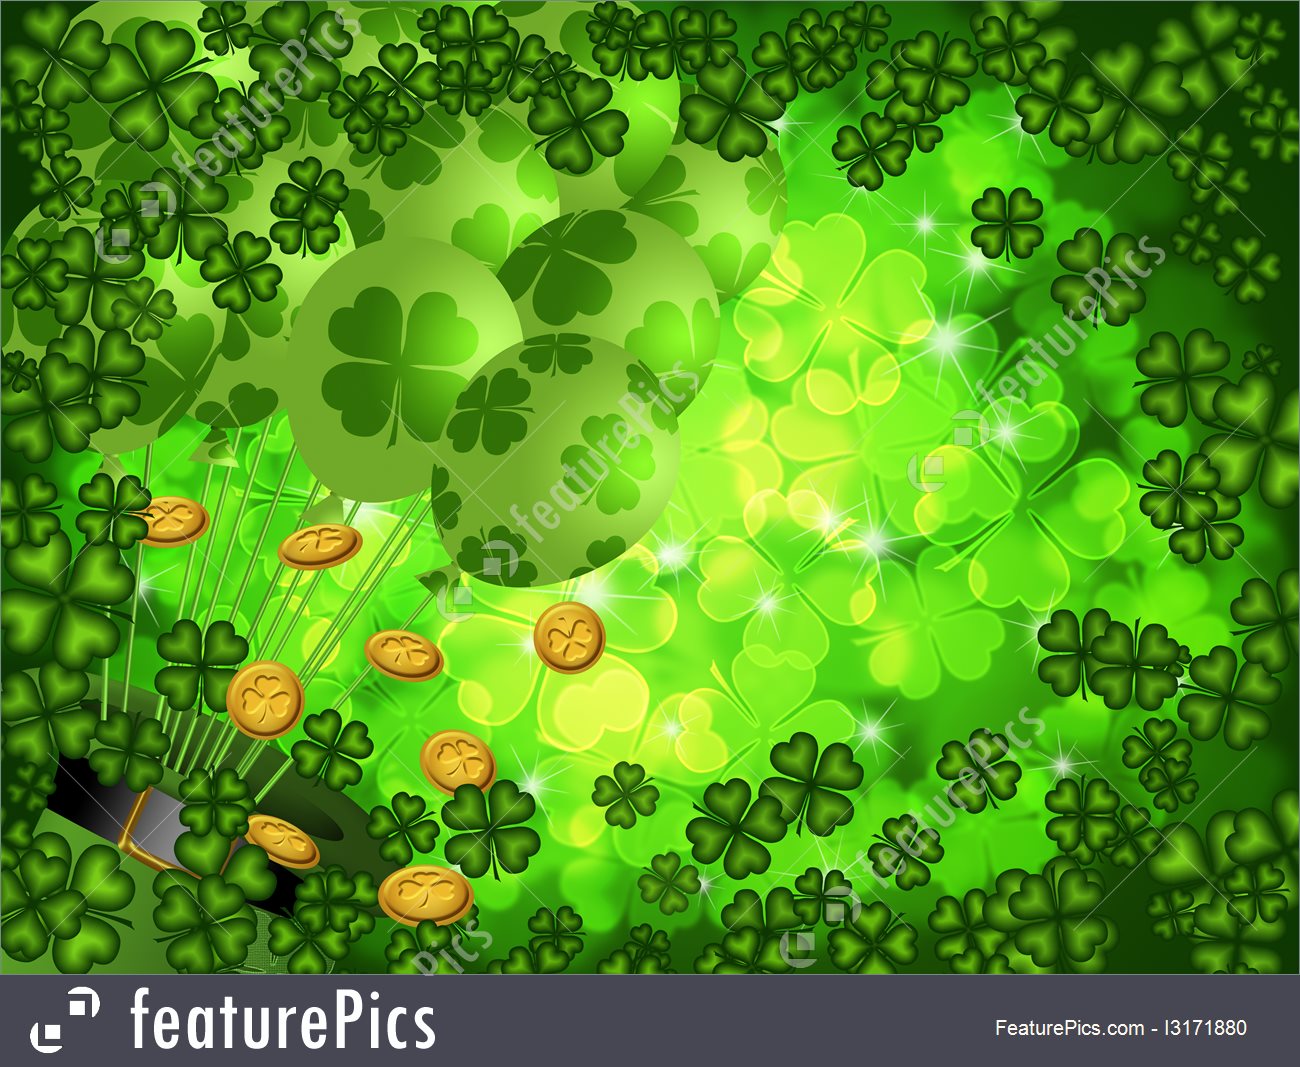 Shamrock Four Leaf Clover Background With Balloons